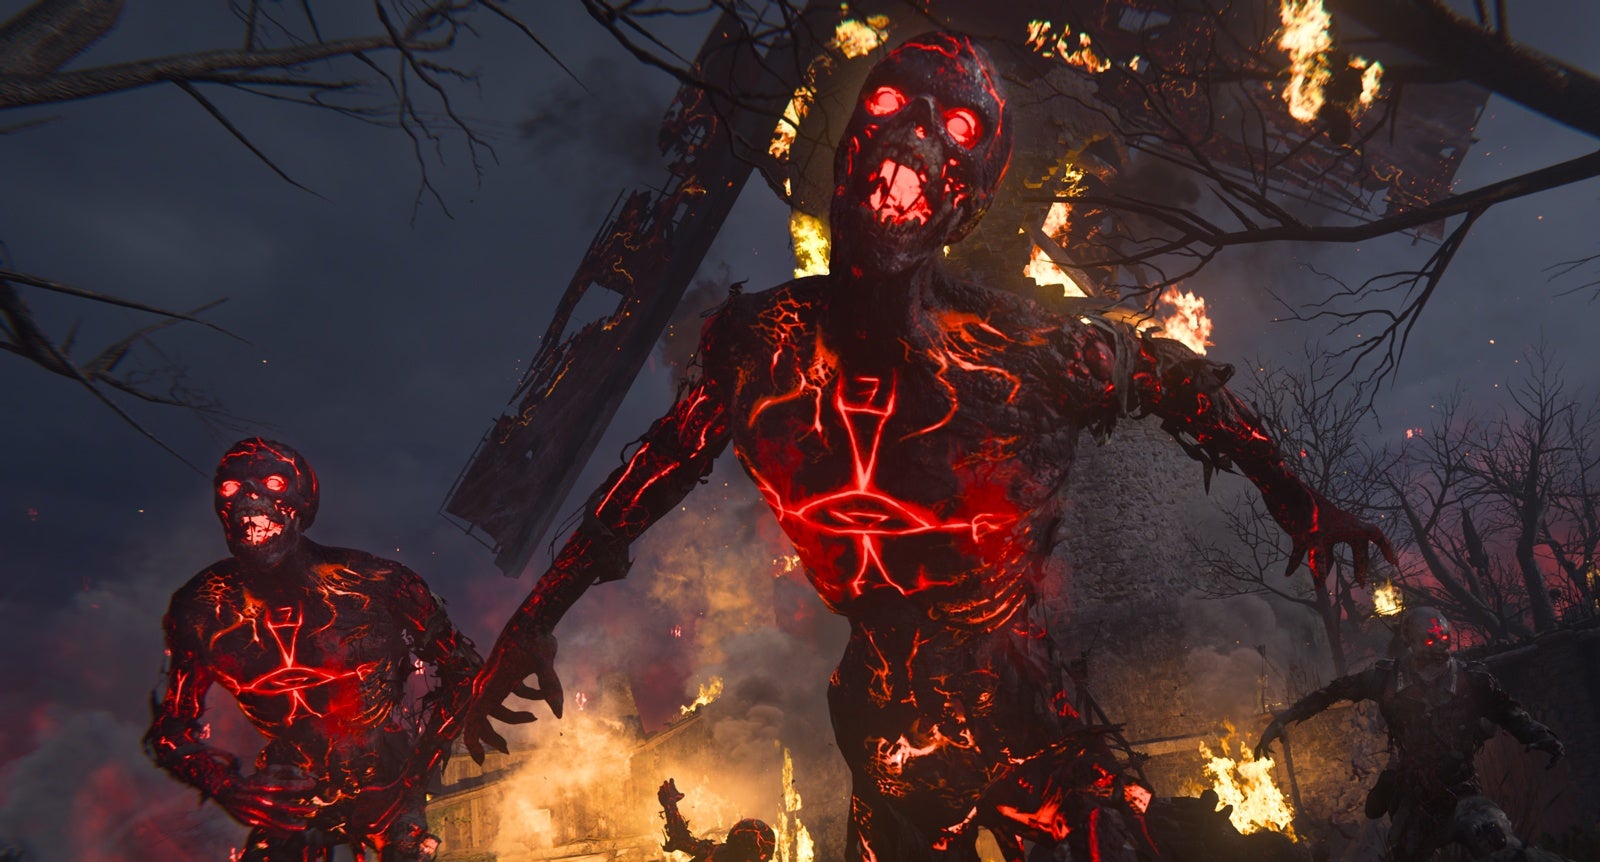 A screenshot from Call Of Duty: Vanguard's zombies mode, in which a glowing red undead is screaming.